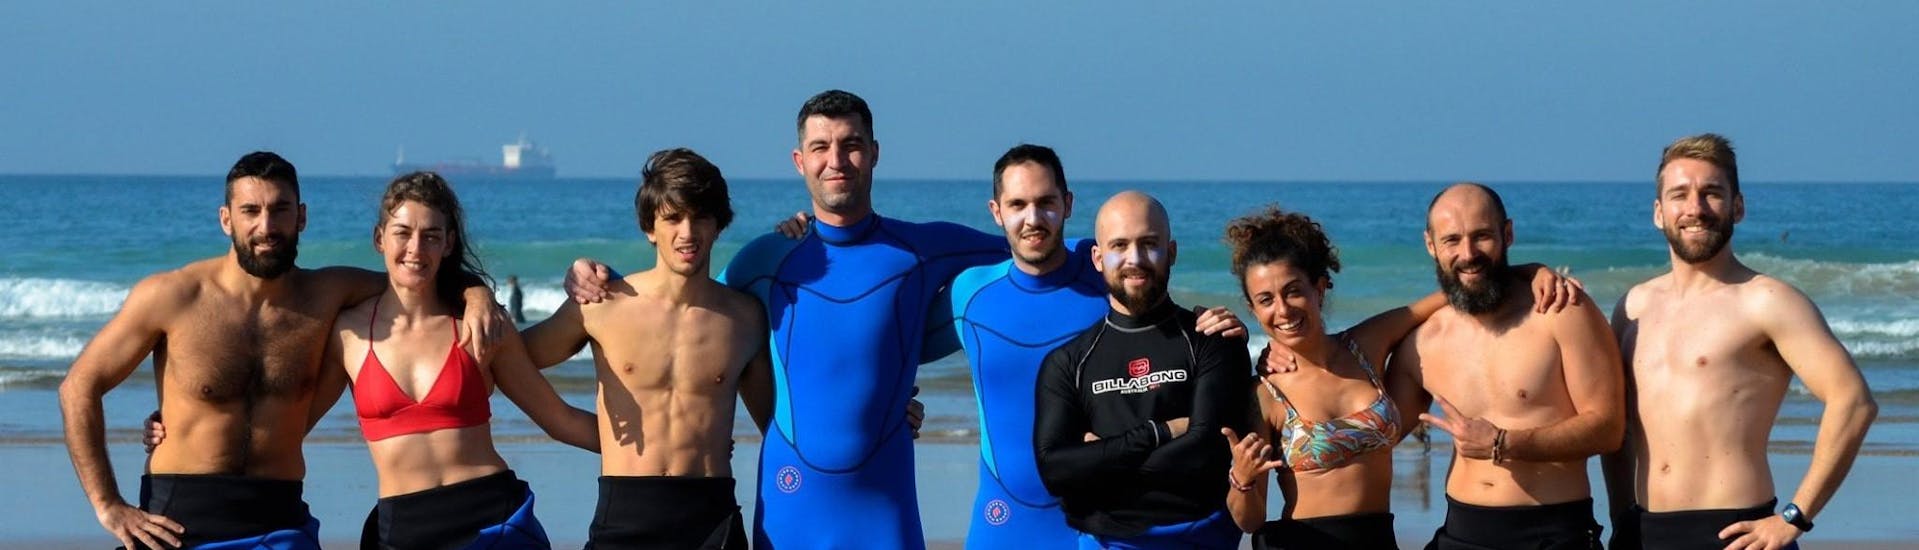 A group of surfers smiles together with their surf instructors from Latas Surf into the camera after their Private Surfing Lessons incl. video analysis - All Levels.